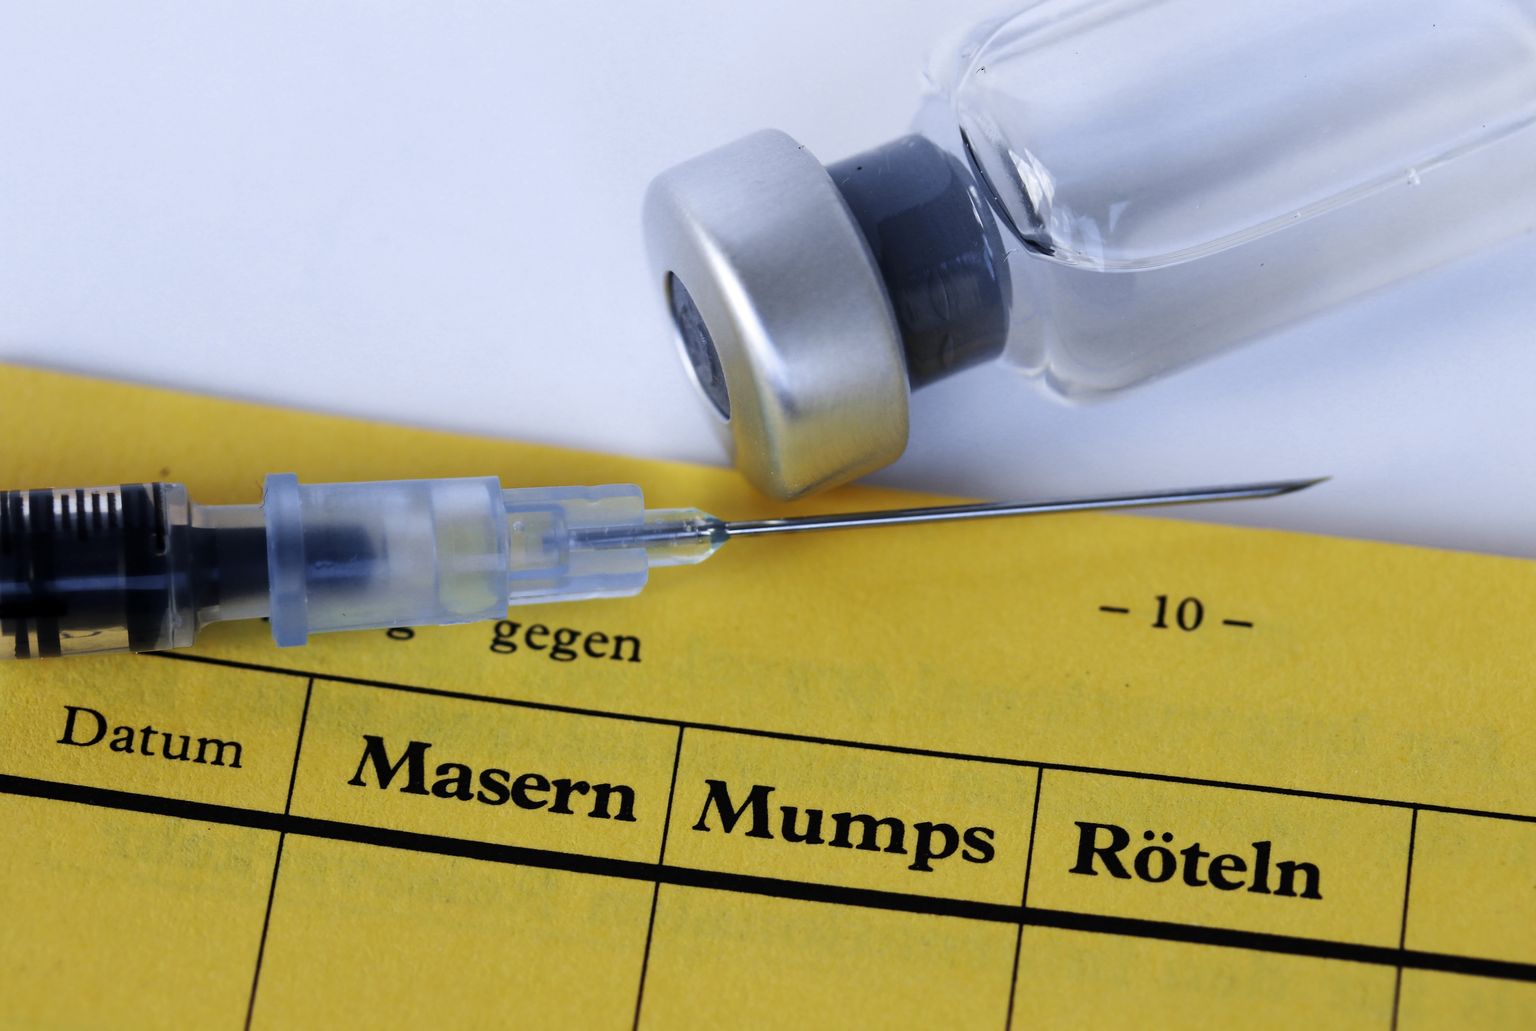 Vaccination certificate with measles, mumps and rubella